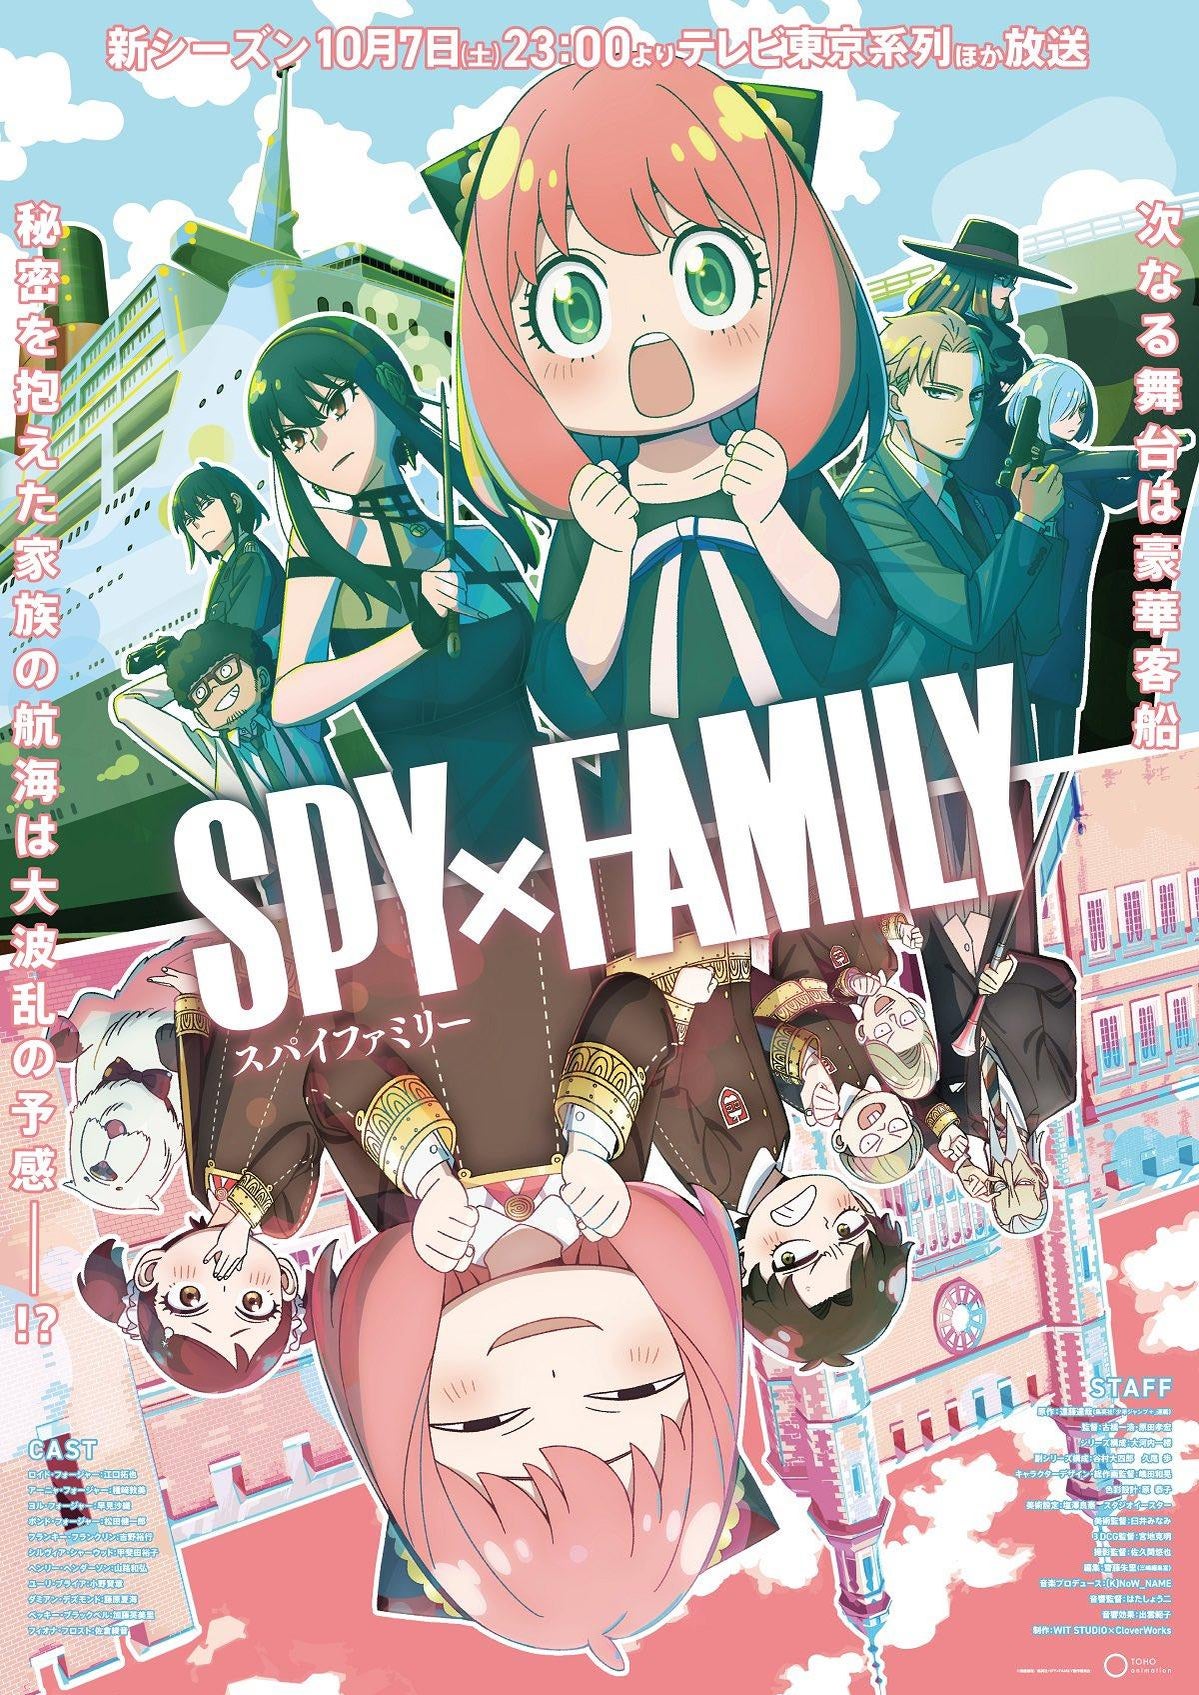 Spy x Family Part 2 To Be Released In Oct, Trailer Shows A